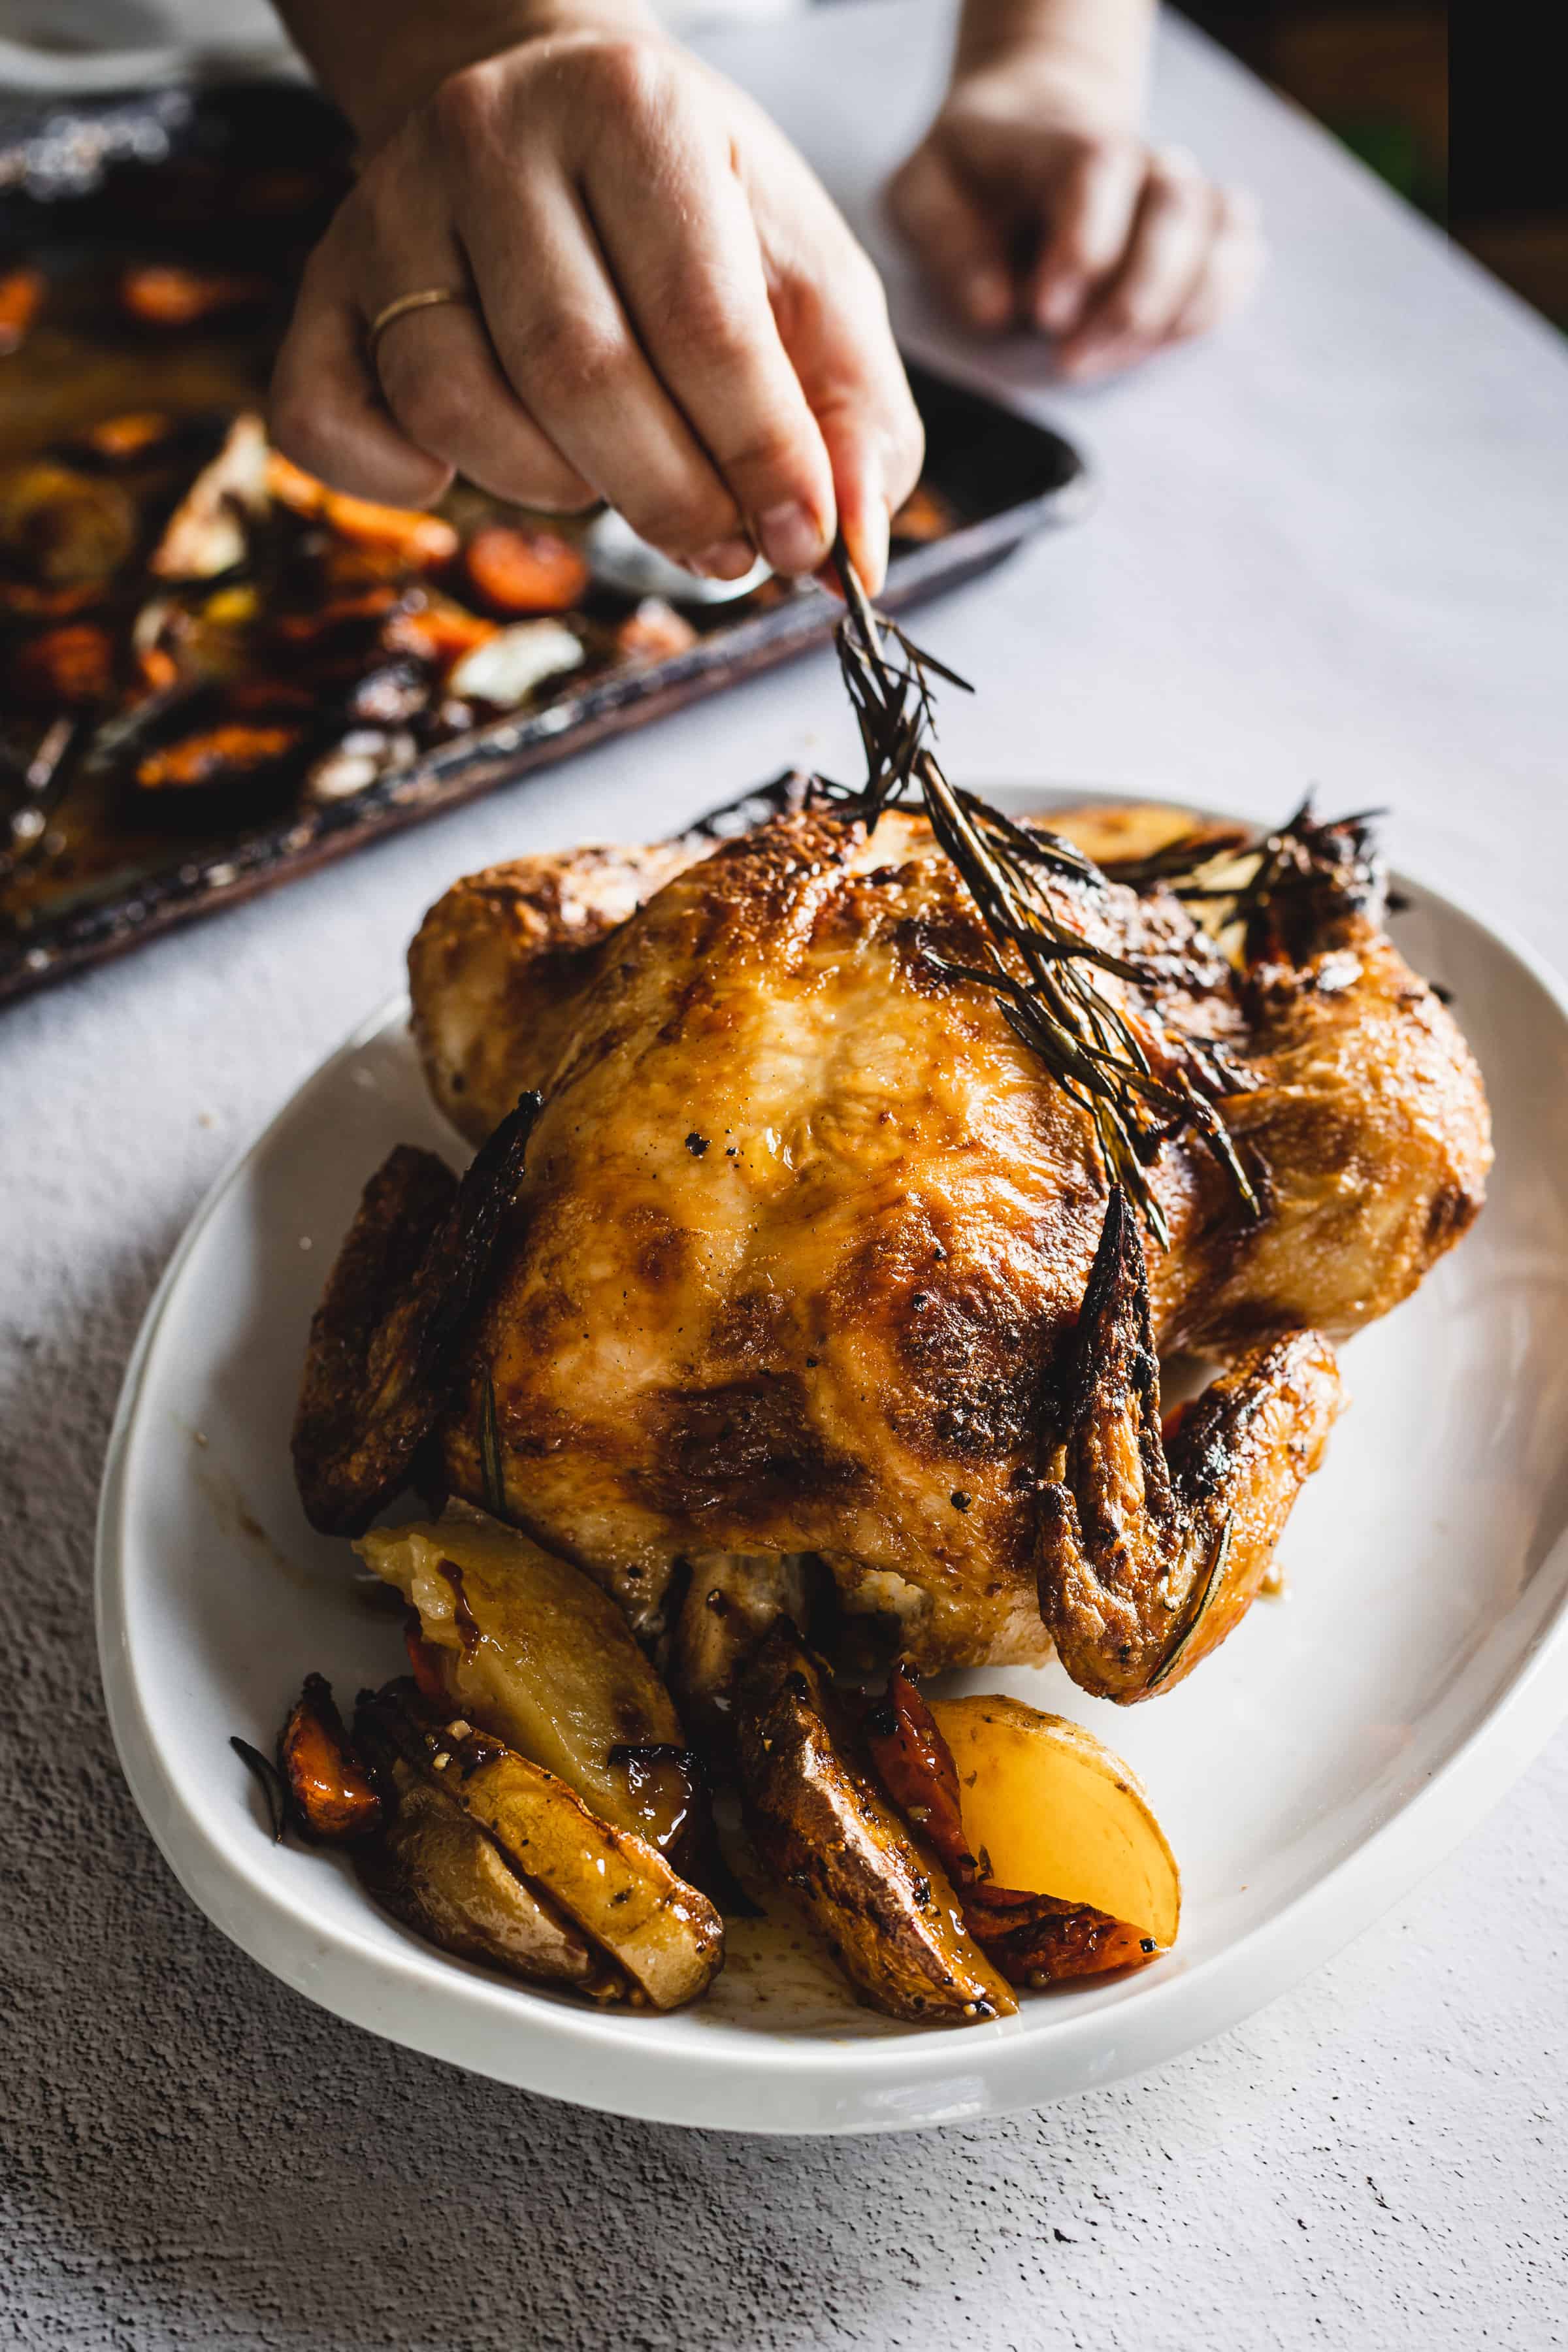 placing a rosemary branch on whole roasted chicken